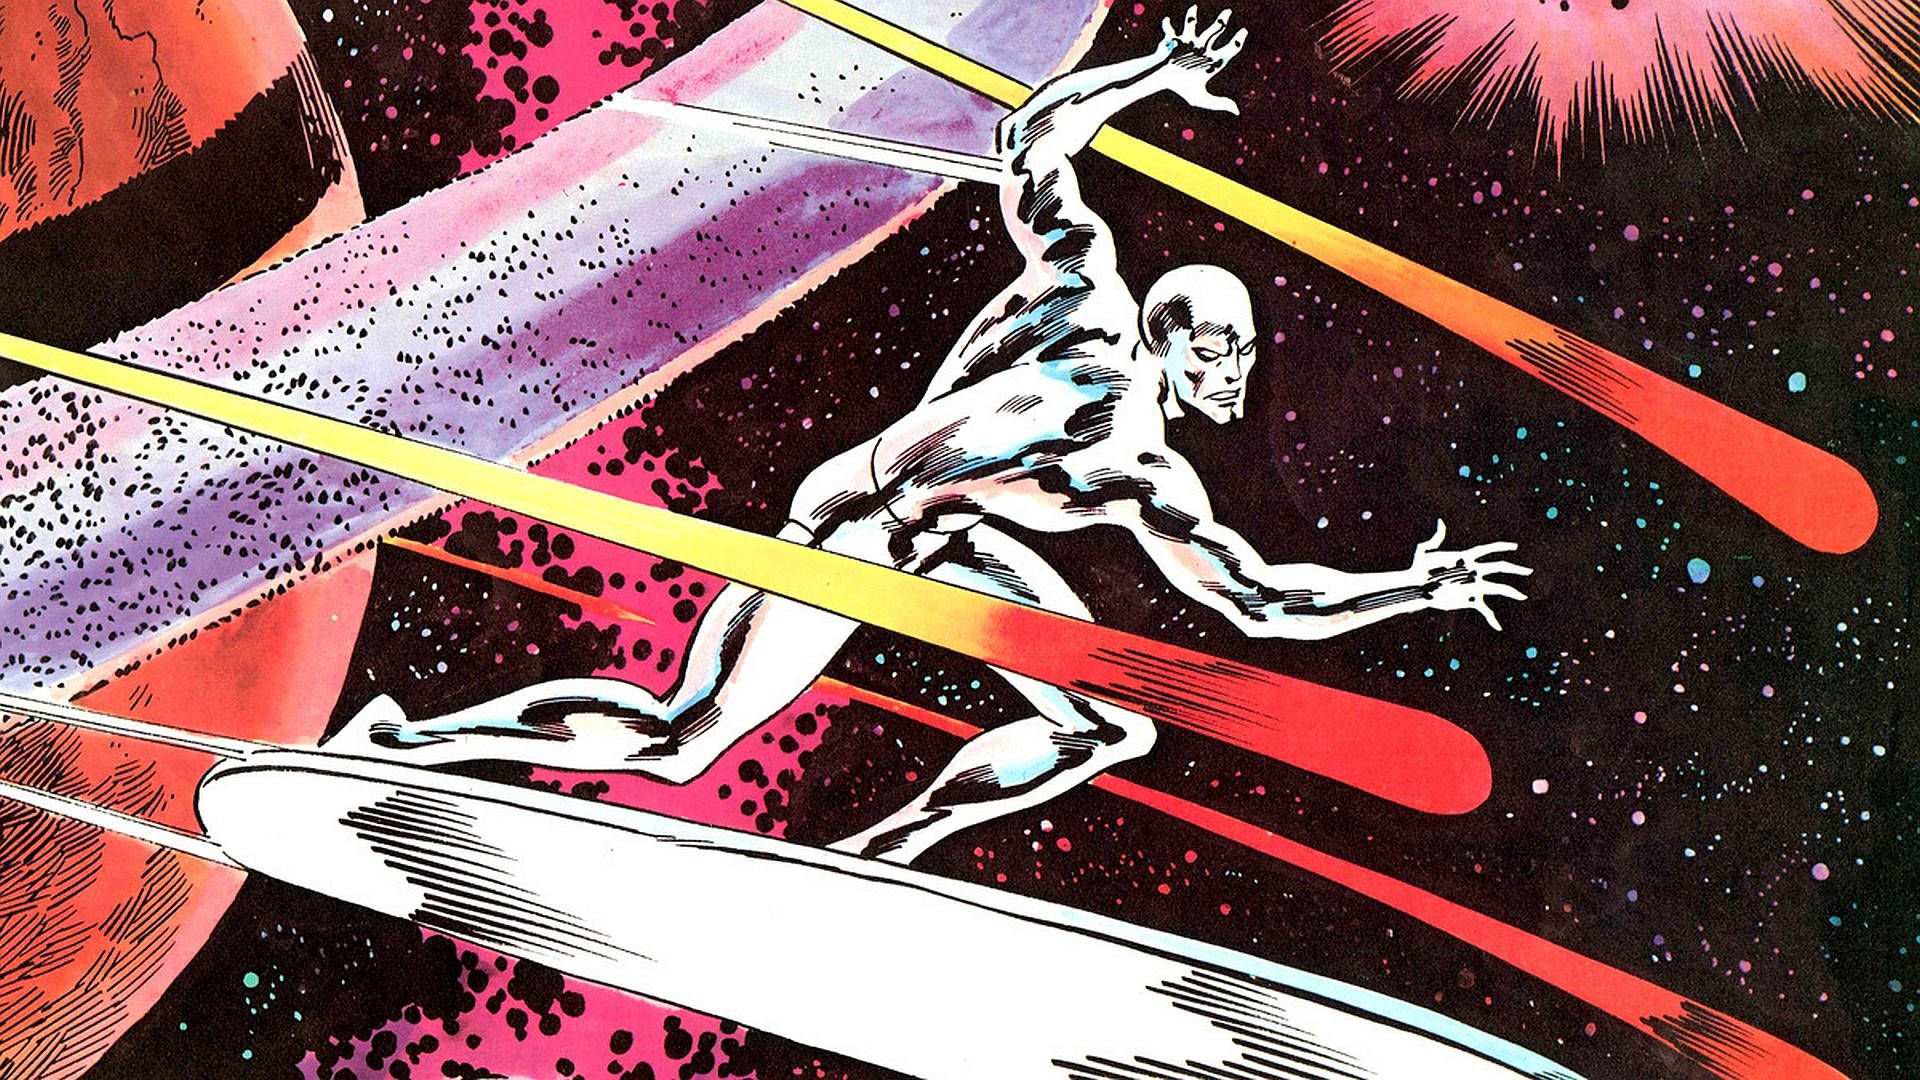 Made a phone wallpaper for Silver Surfer Black I had to the art was  amazing  rMarvel